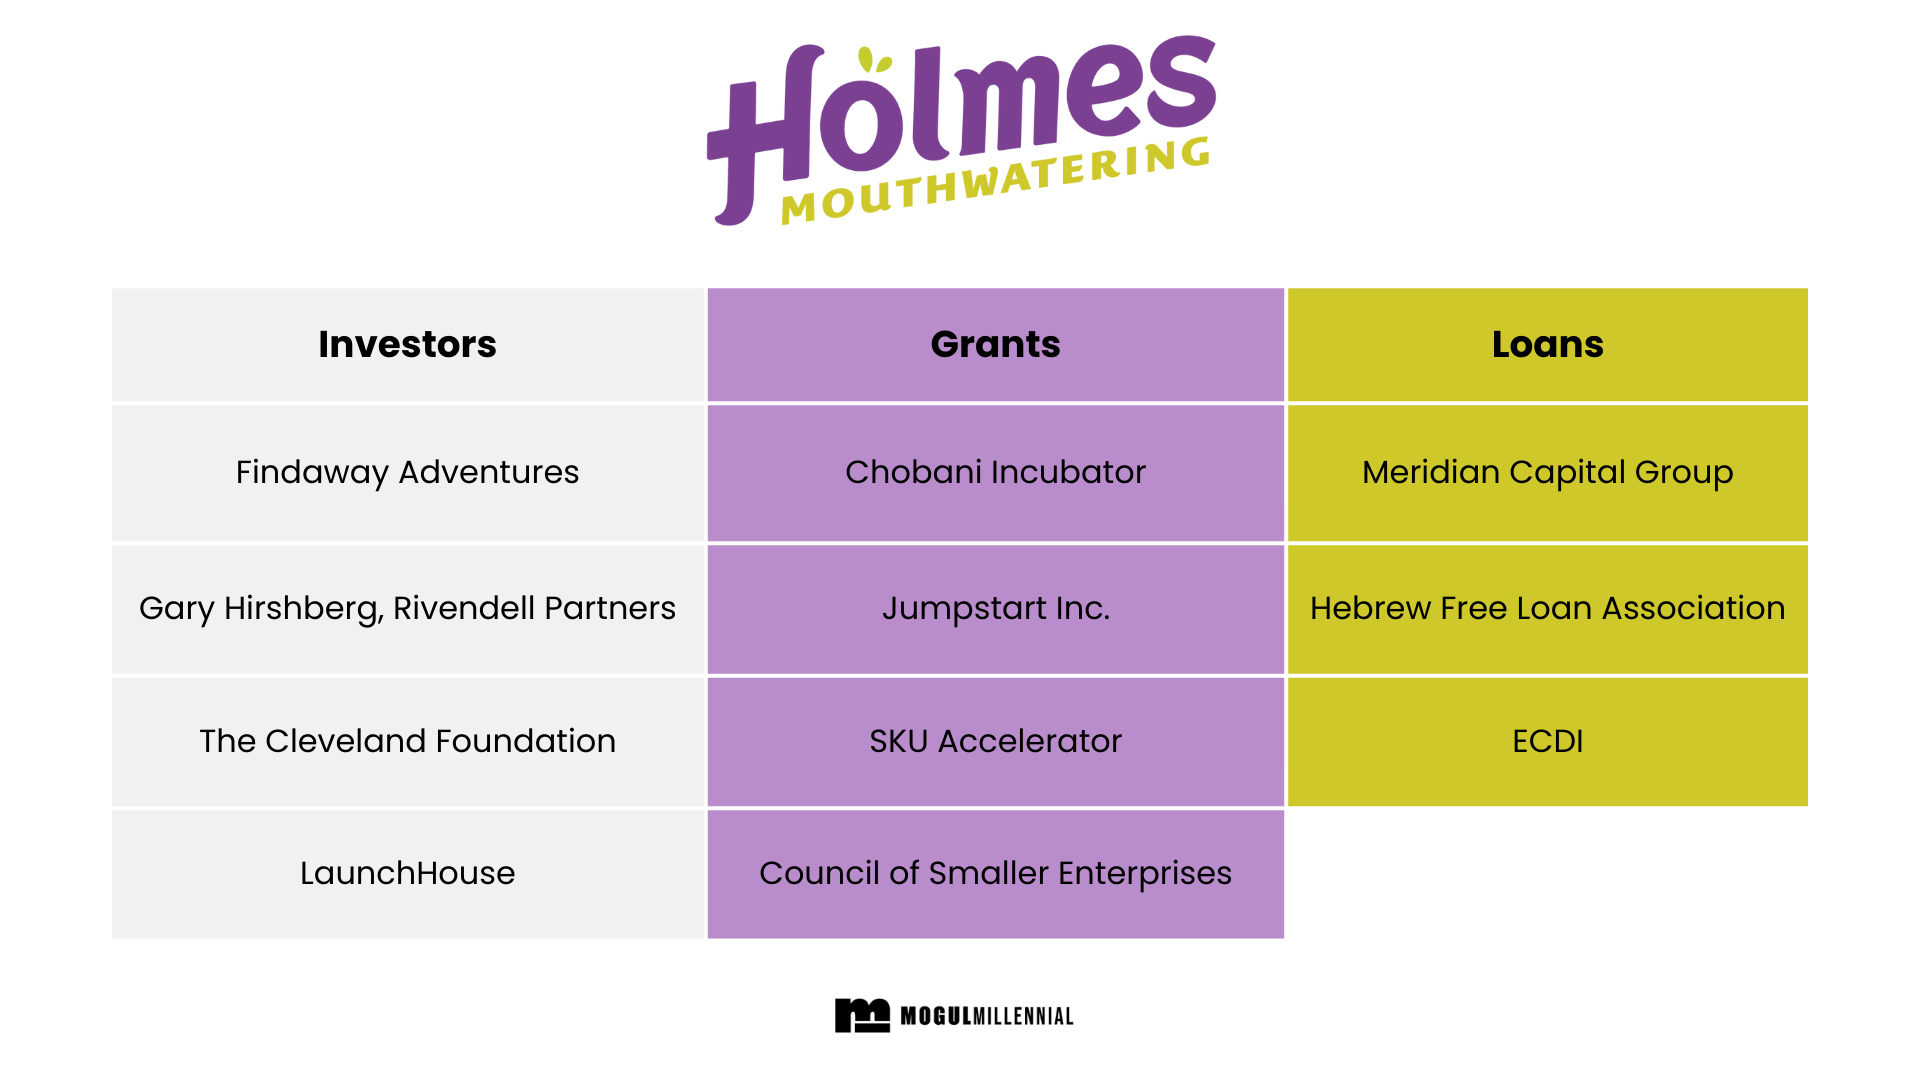 Read the pitch deck that Holmes Mouthwatering used to secure funding